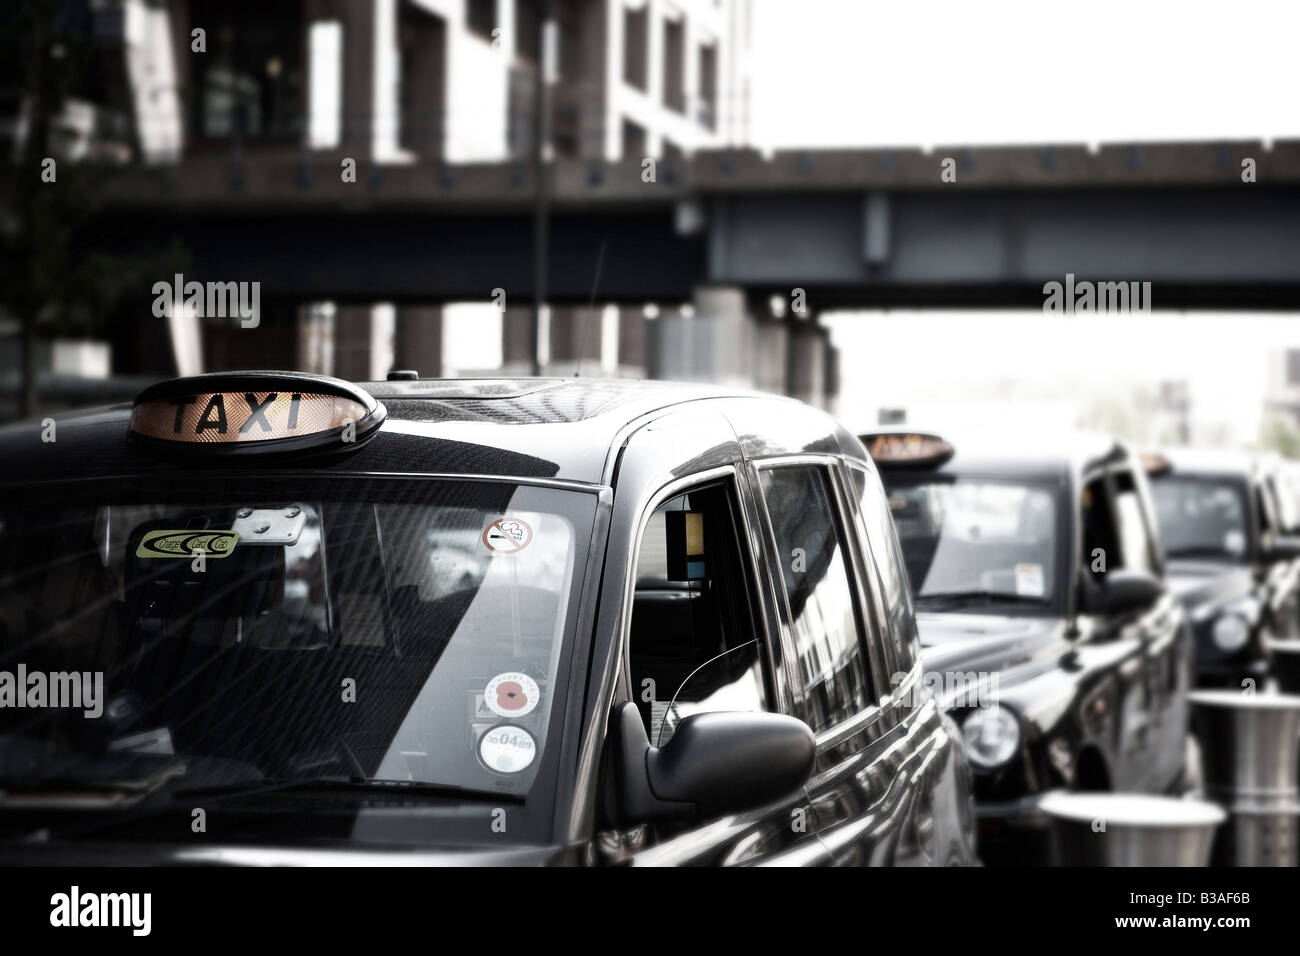 Black taxi cab in London Stock Photo